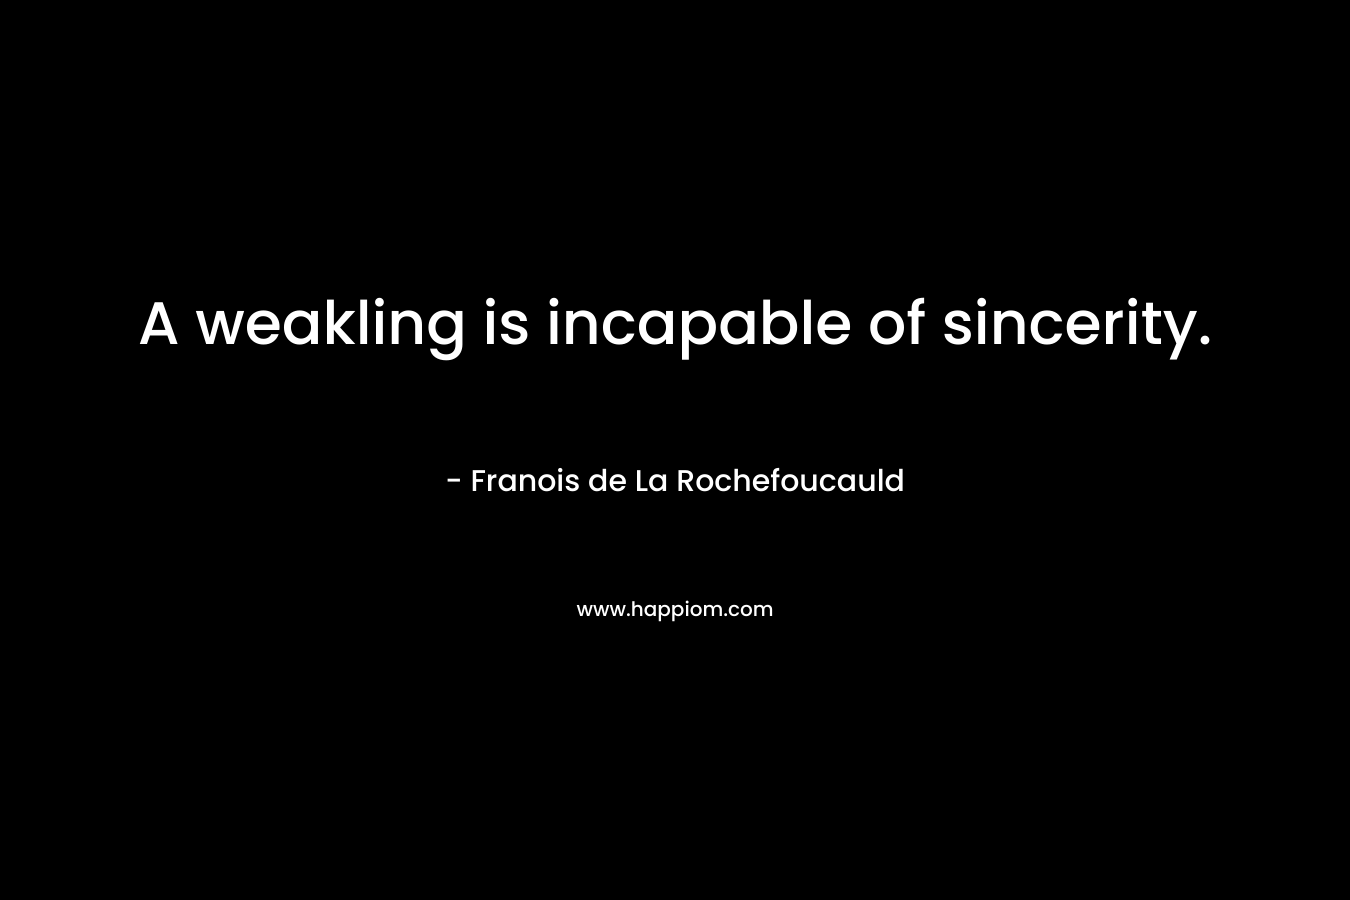 A weakling is incapable of sincerity.